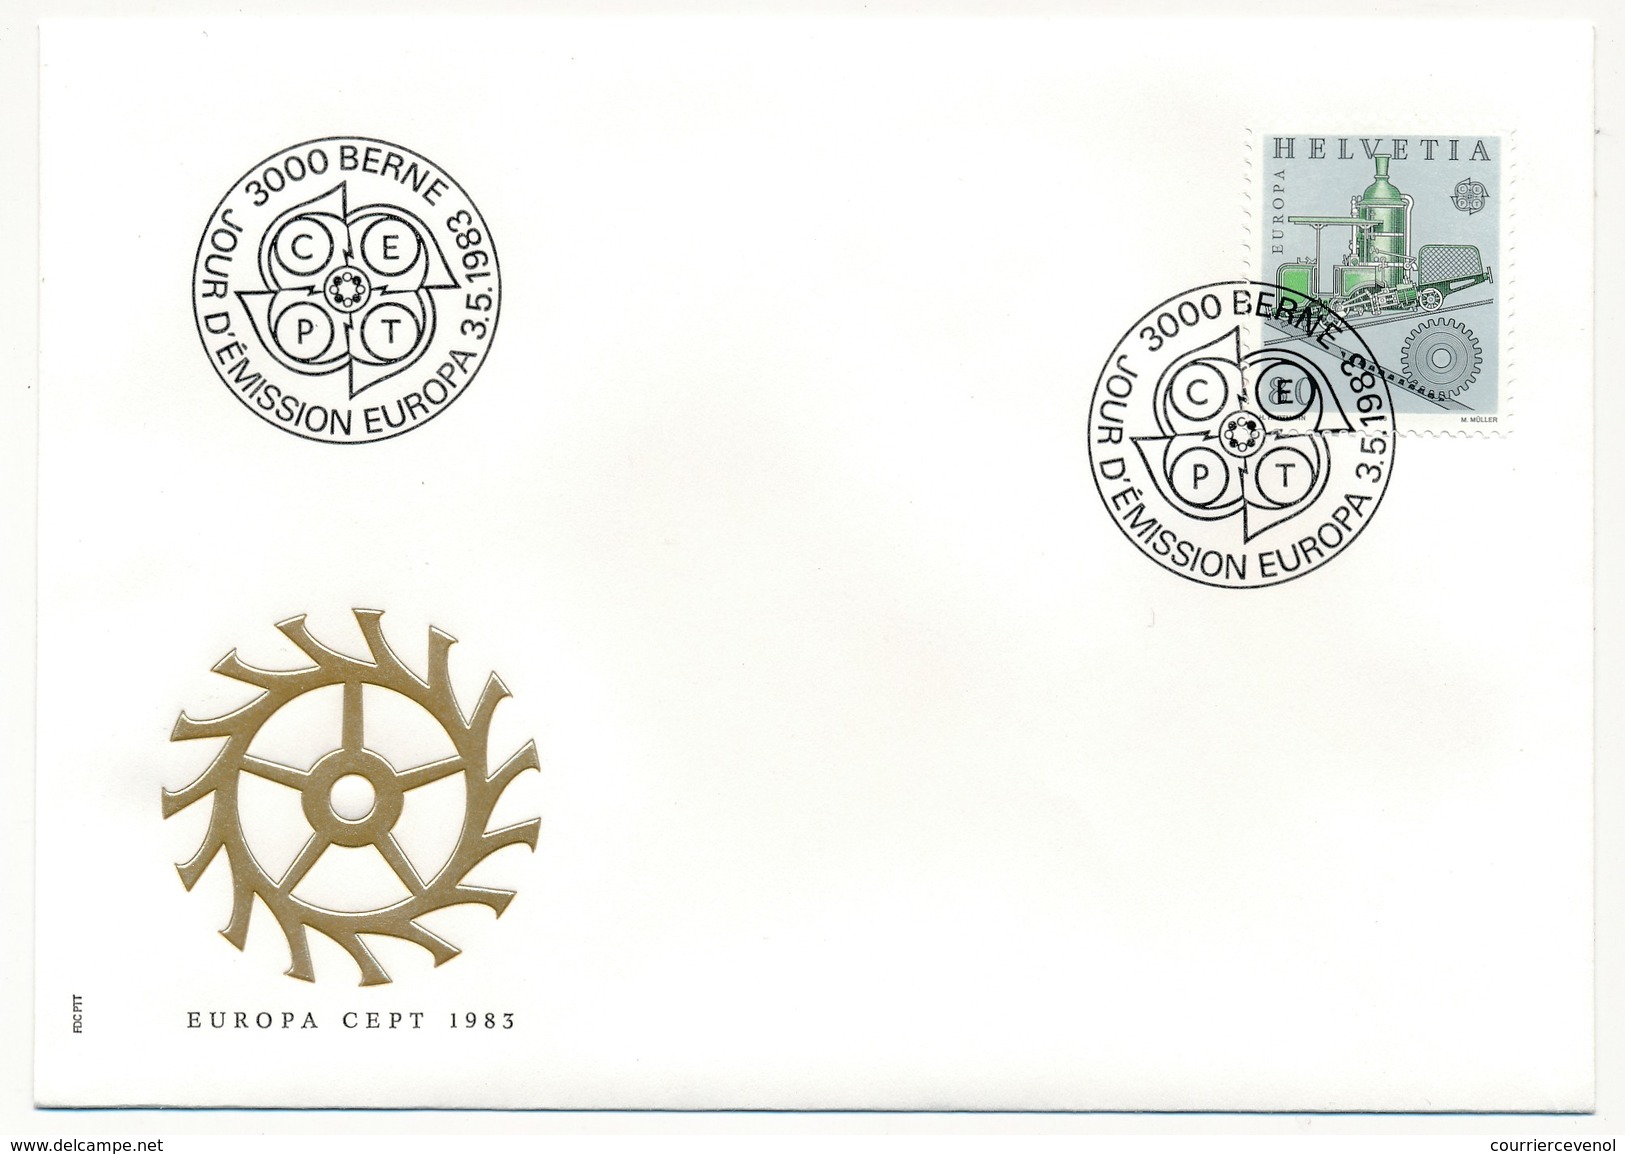 SUISSE - 3 Enveloppes FDC -  EUROPA 1983 - Berne - 3/05/1983 - FDC